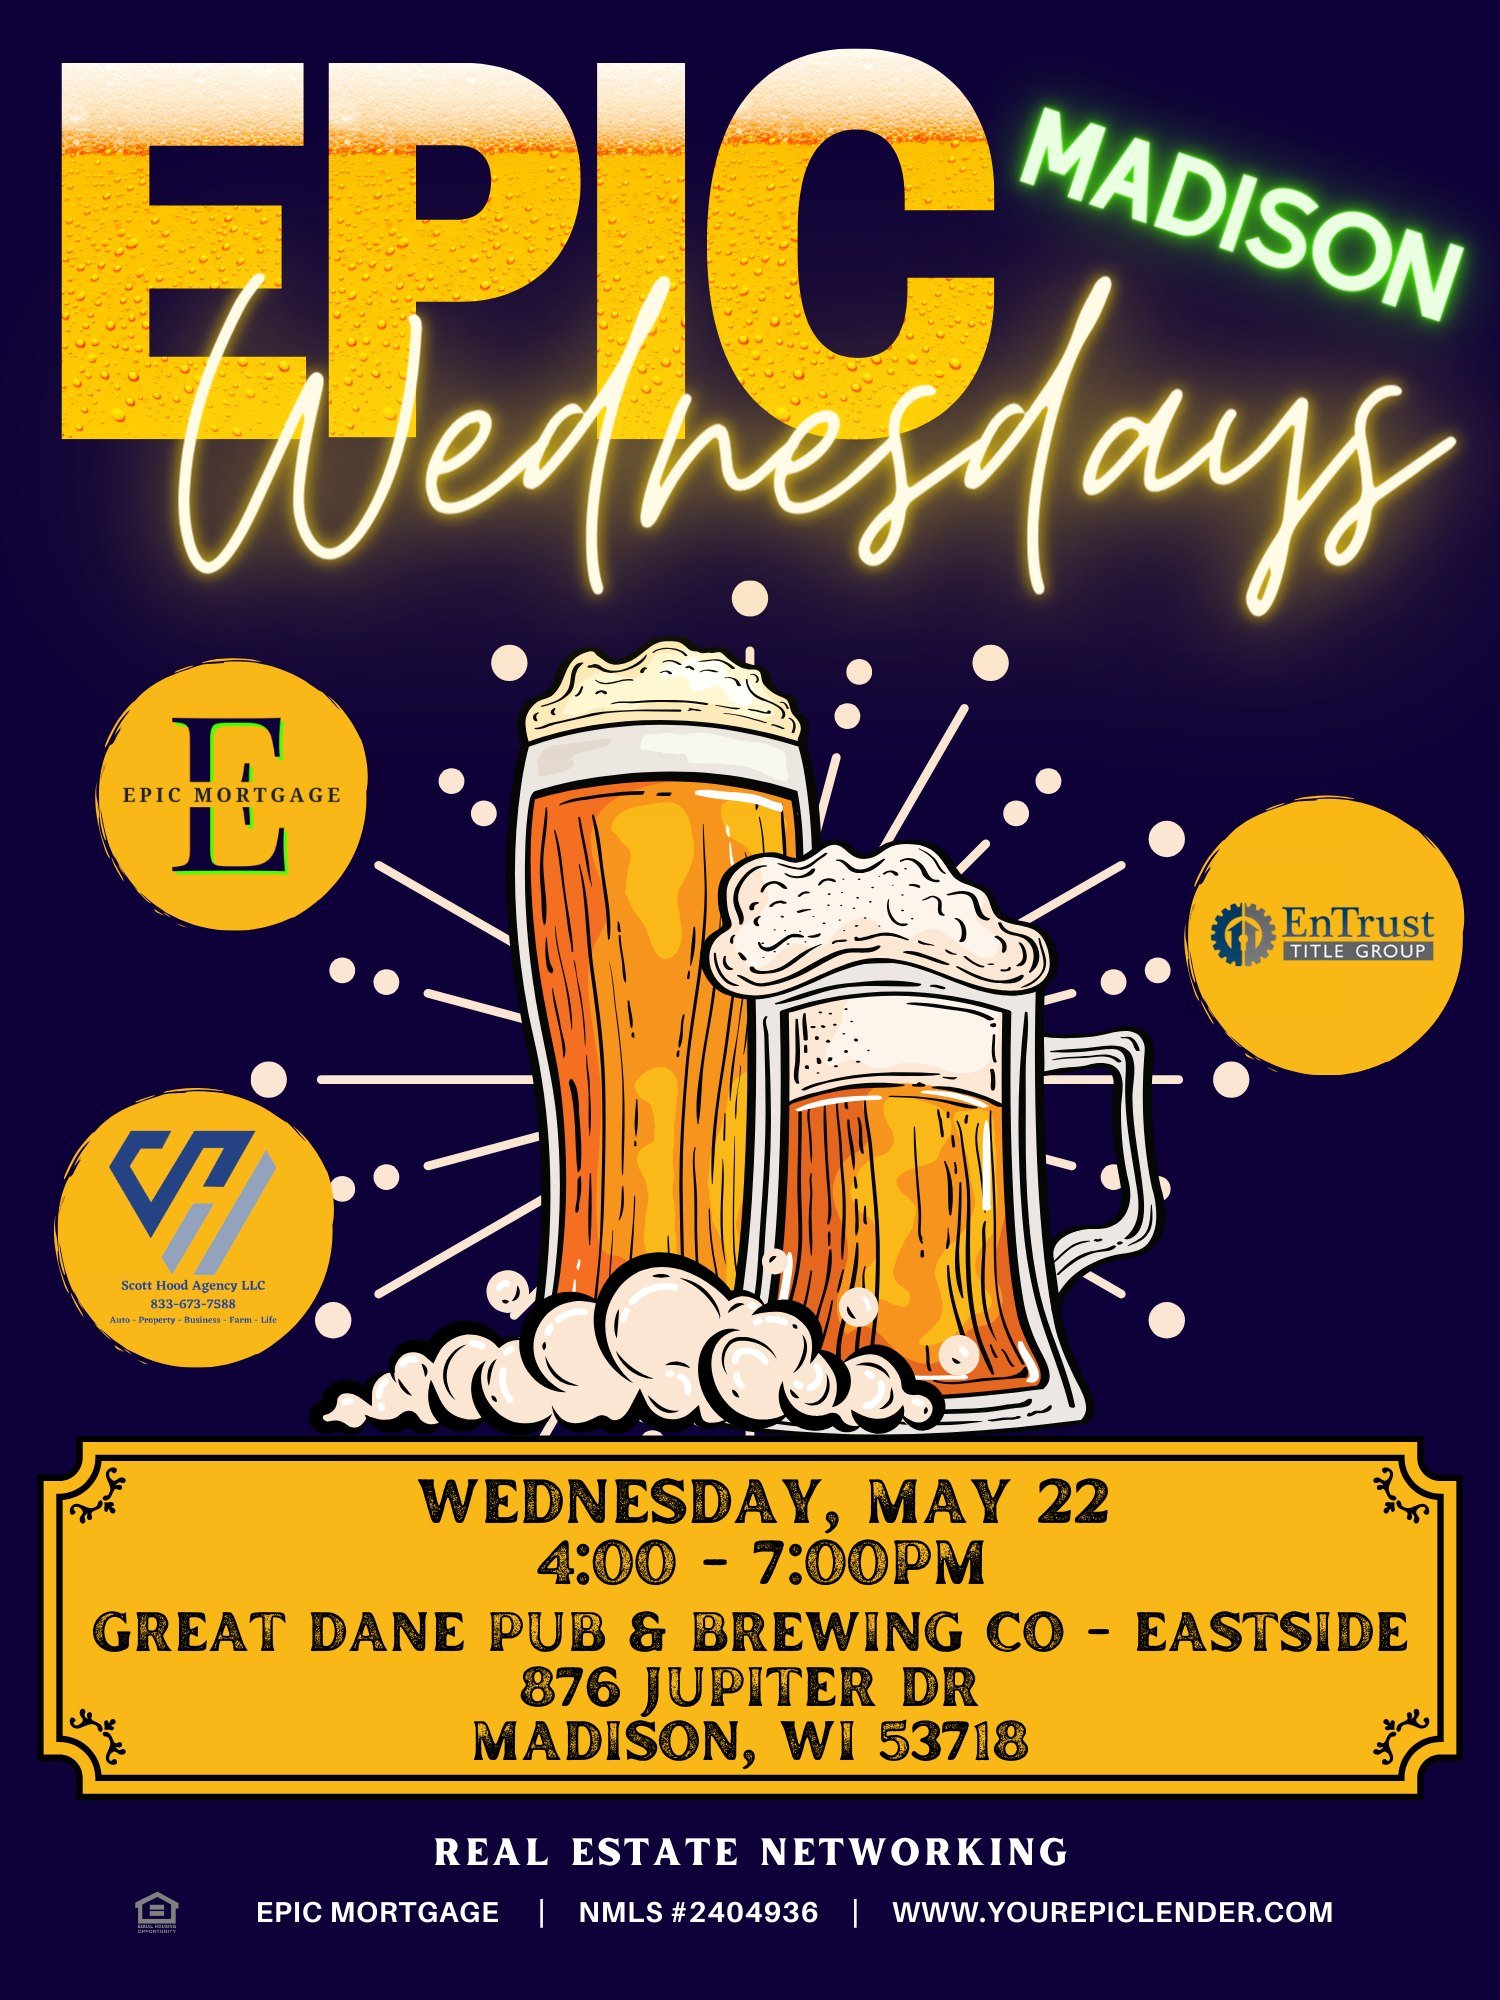 🍻Epic Wednesday MADISON!🍻

Will we see you at our first Epic Wednesday in Madison?  Let us know if you can make it!

RSVP: https://bit.ly/epicwed-madisonmay2024 

A big thank you to our sponsors!
Scott Hood Agency LLC 
EnTrust Title Group 

#yourep